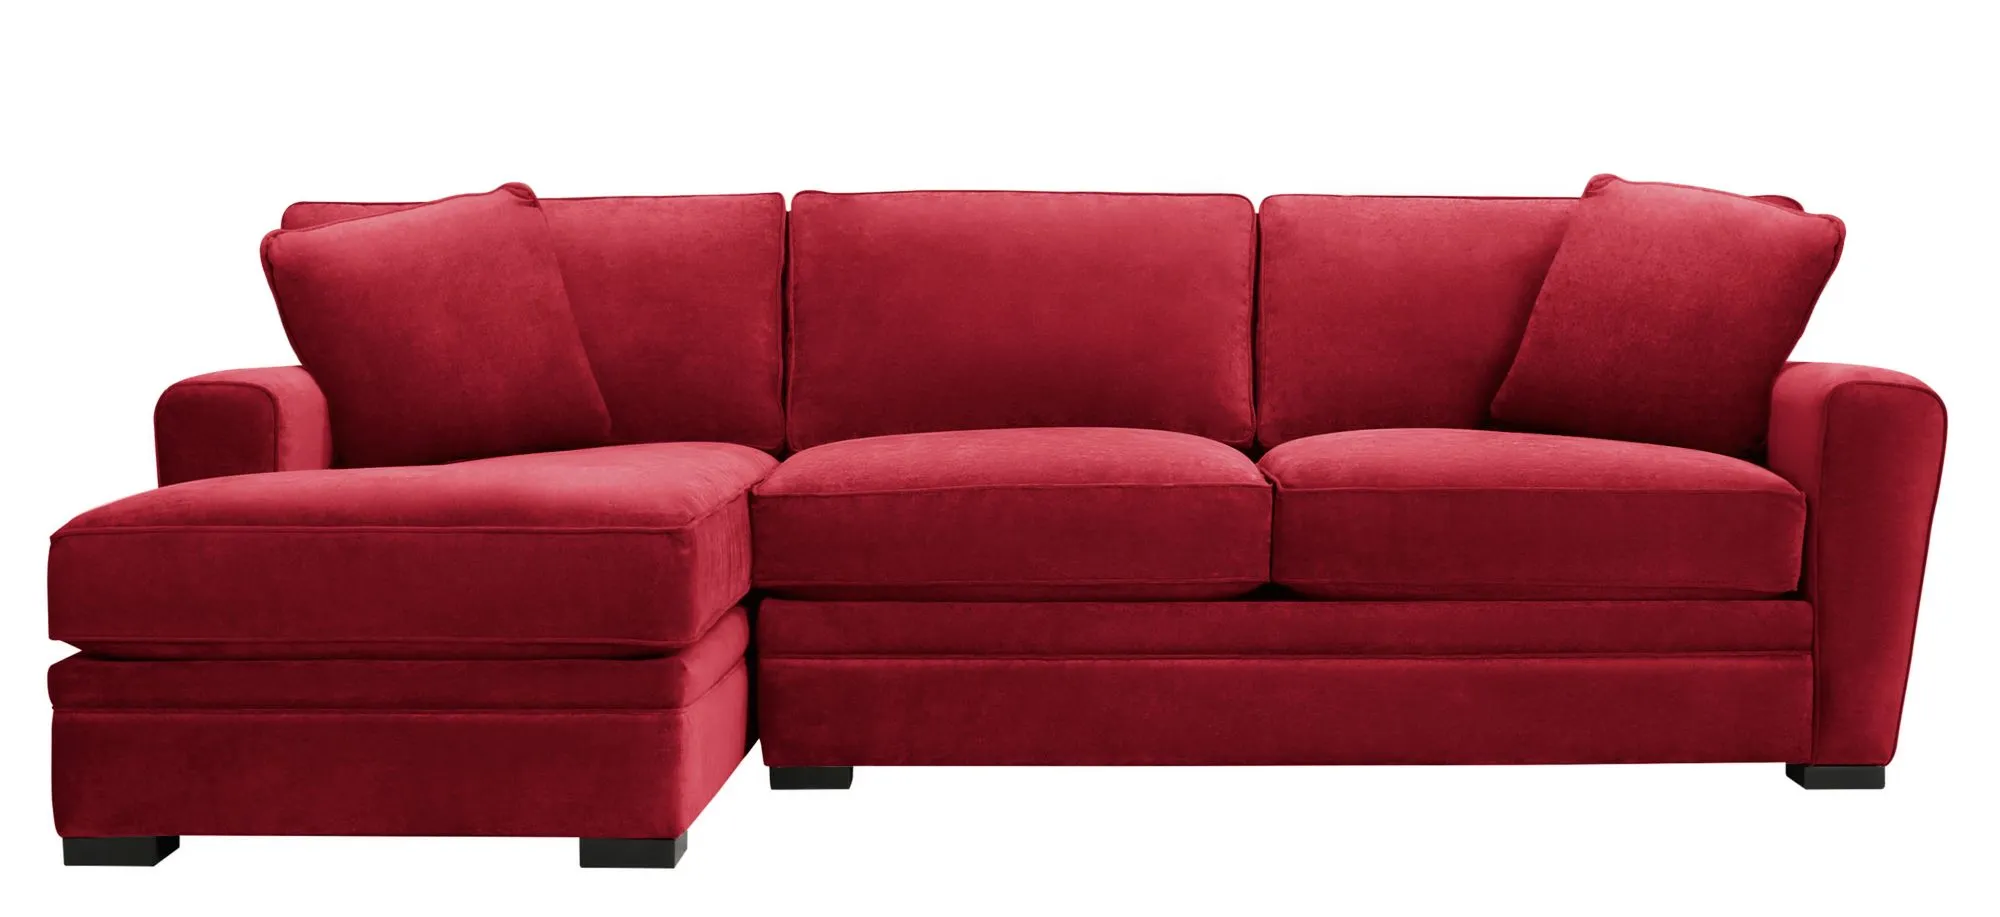 Artemis II 2-pc. Left Hand Facing Sectional Sofa in Gypsy Scarlet by Jonathan Louis